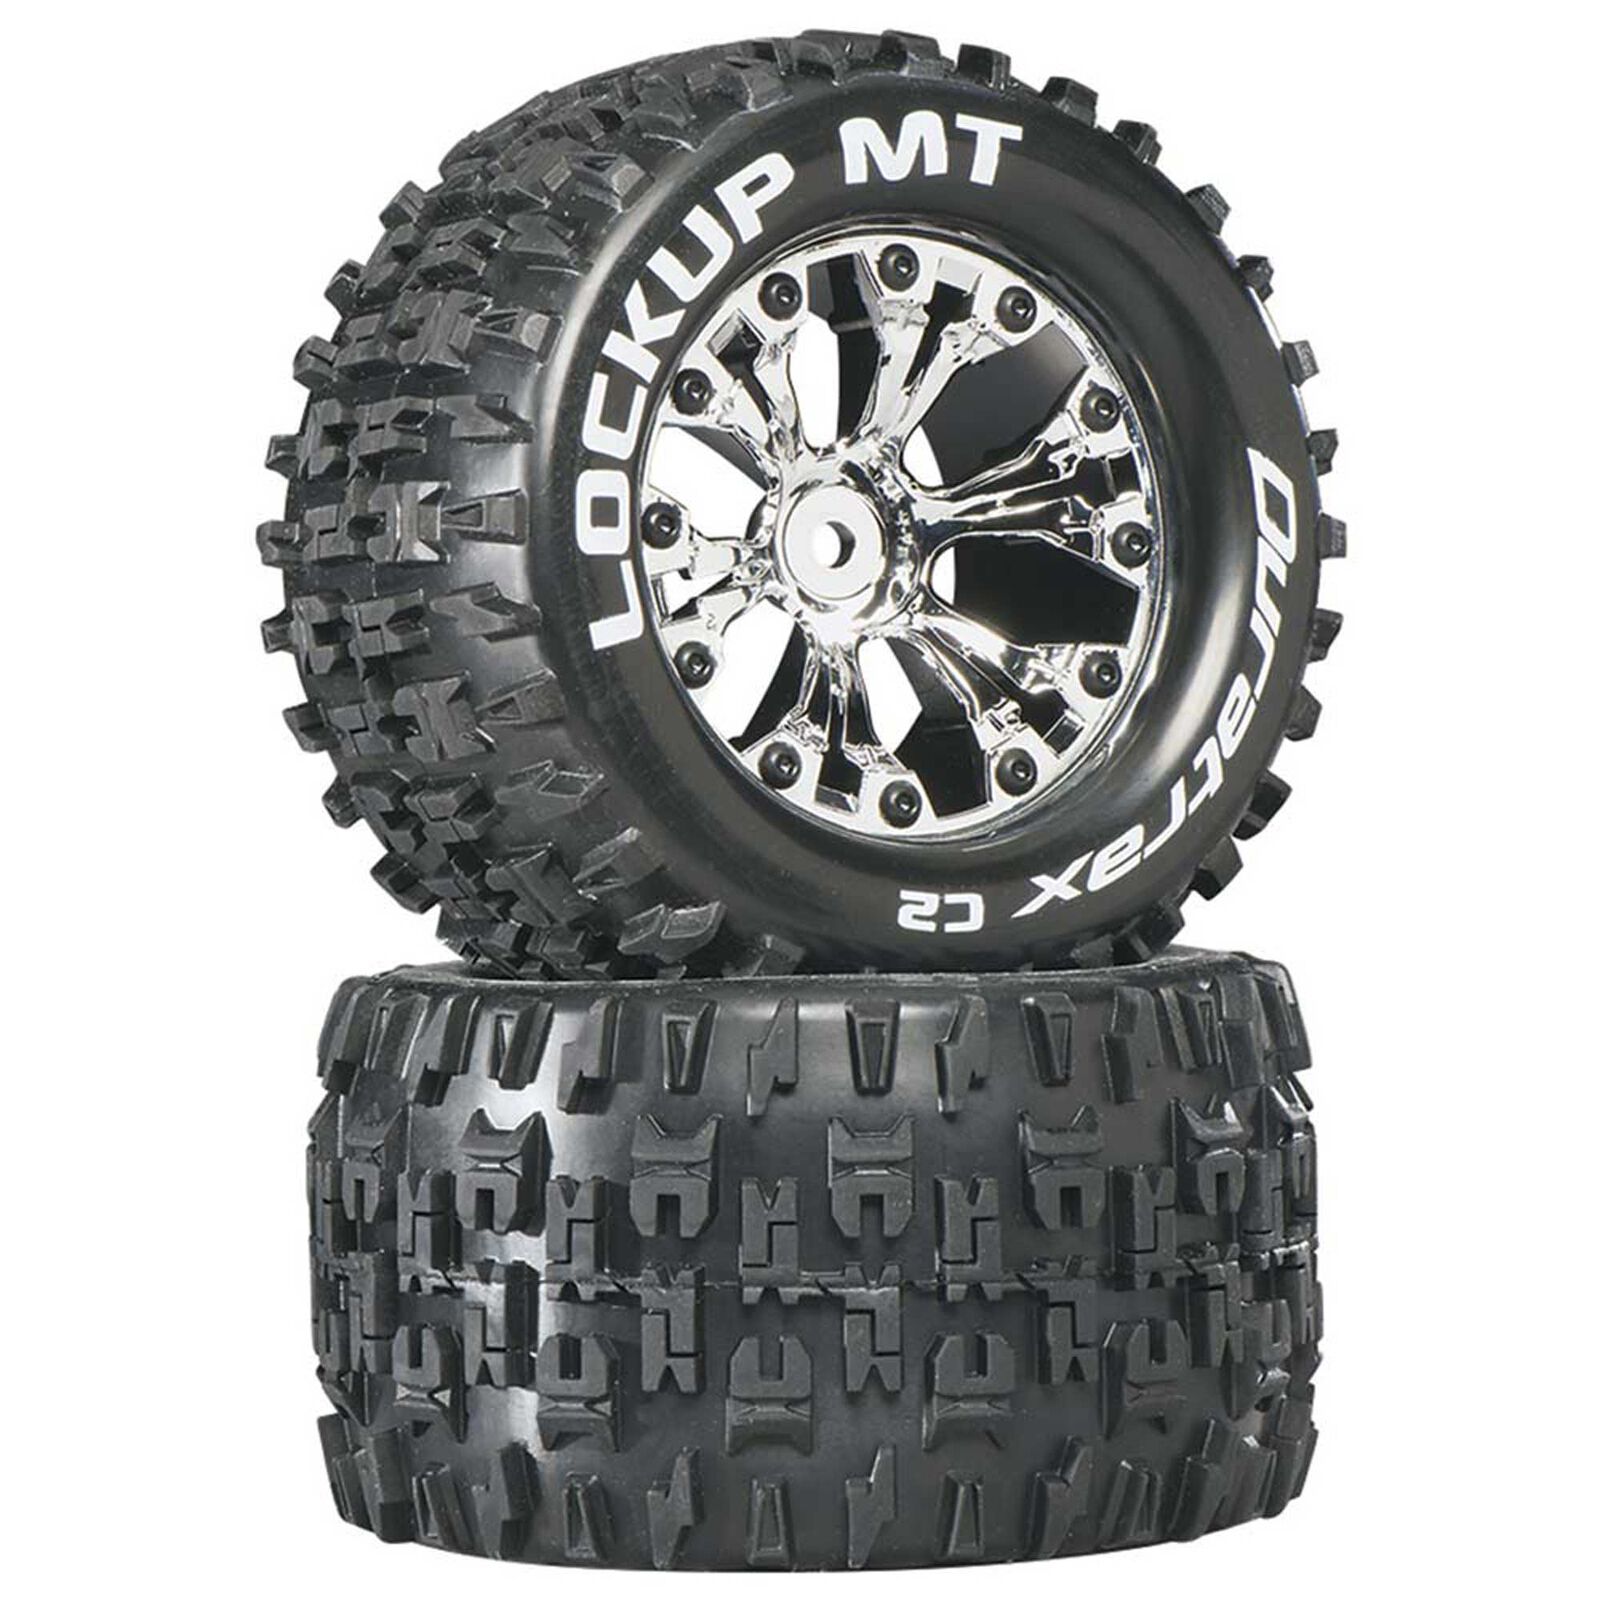 Lockup MT 2.8" 2WD Mounted Rear C2 Tires, Chrome (2)